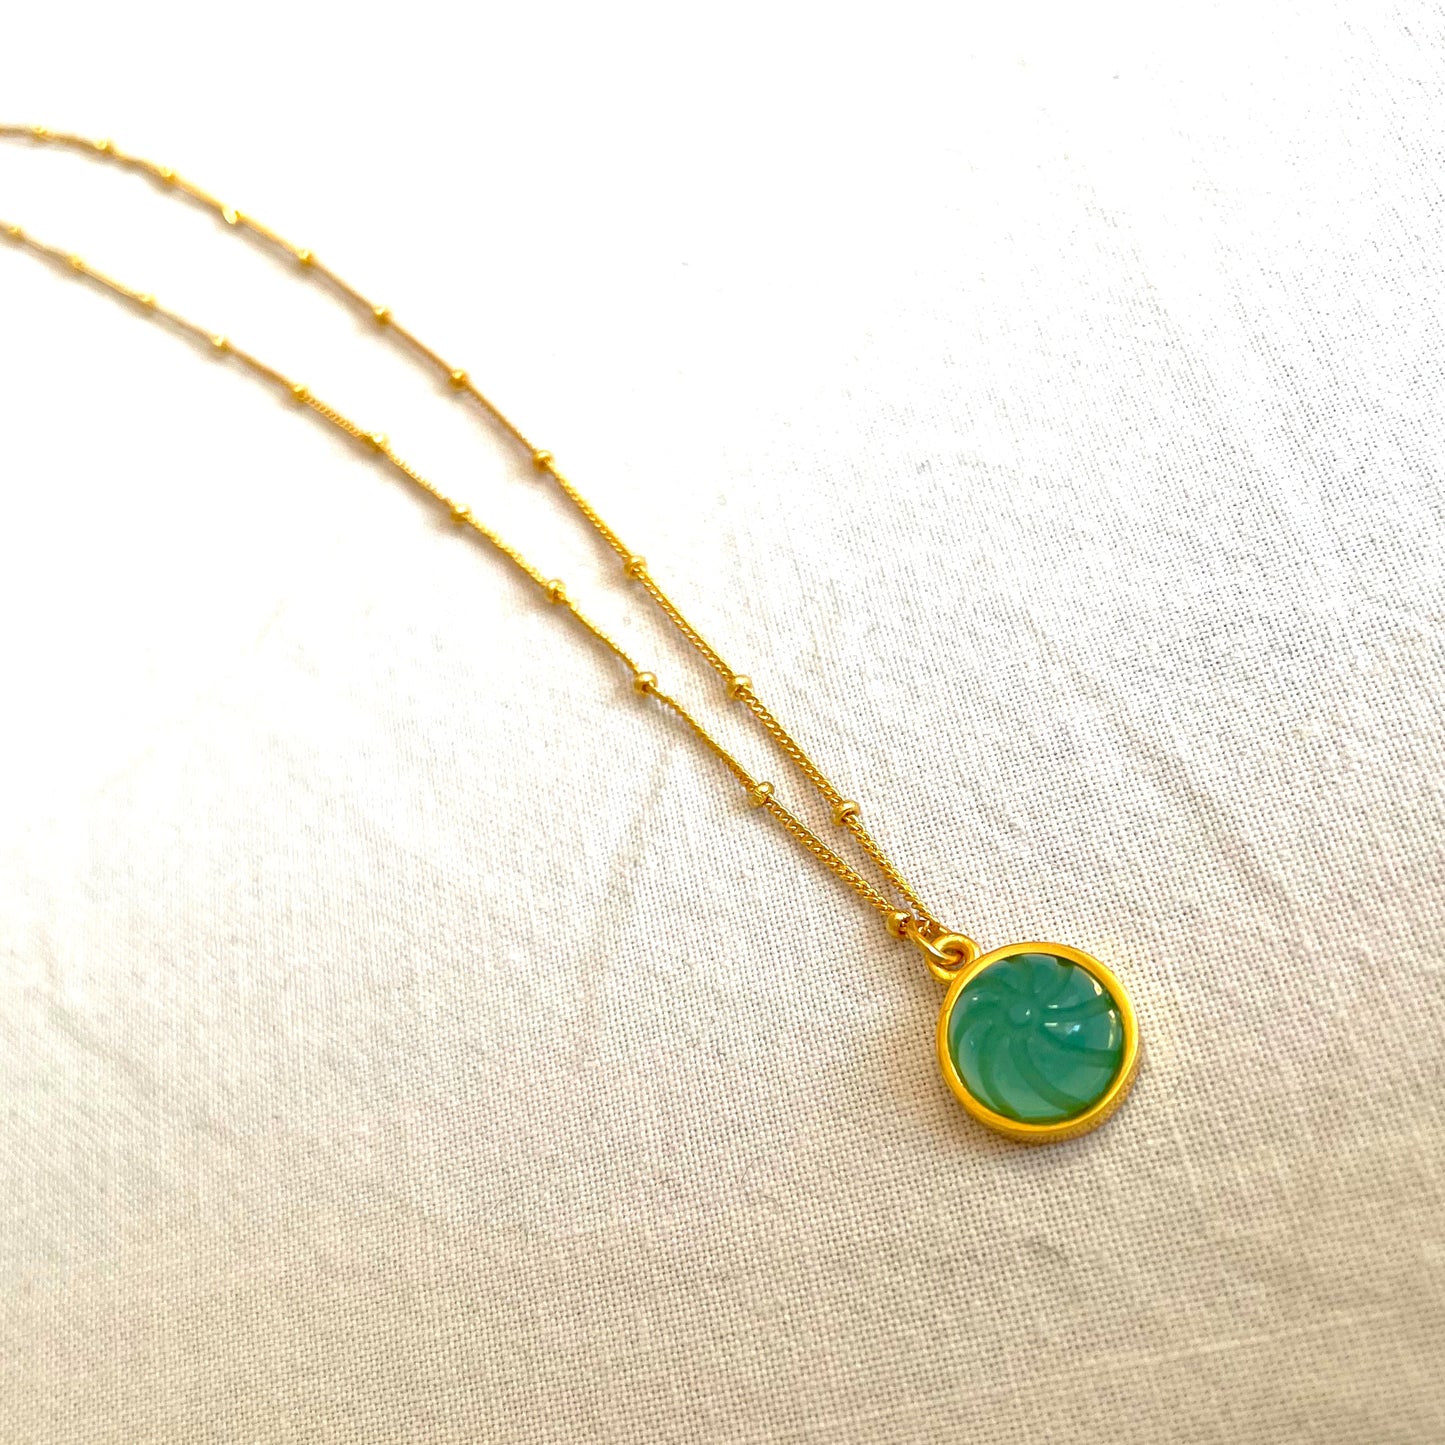 Aqua chalcedony Gold Pendant Necklace, Turquoise Pendant Necklace, Gold Plated on 925 Sterling Silver, handmade gemstone necklace, Gift, turquoise necklace, gemstones, gold chain, Crystal, mothers day gift, small business, london, dainty necklace